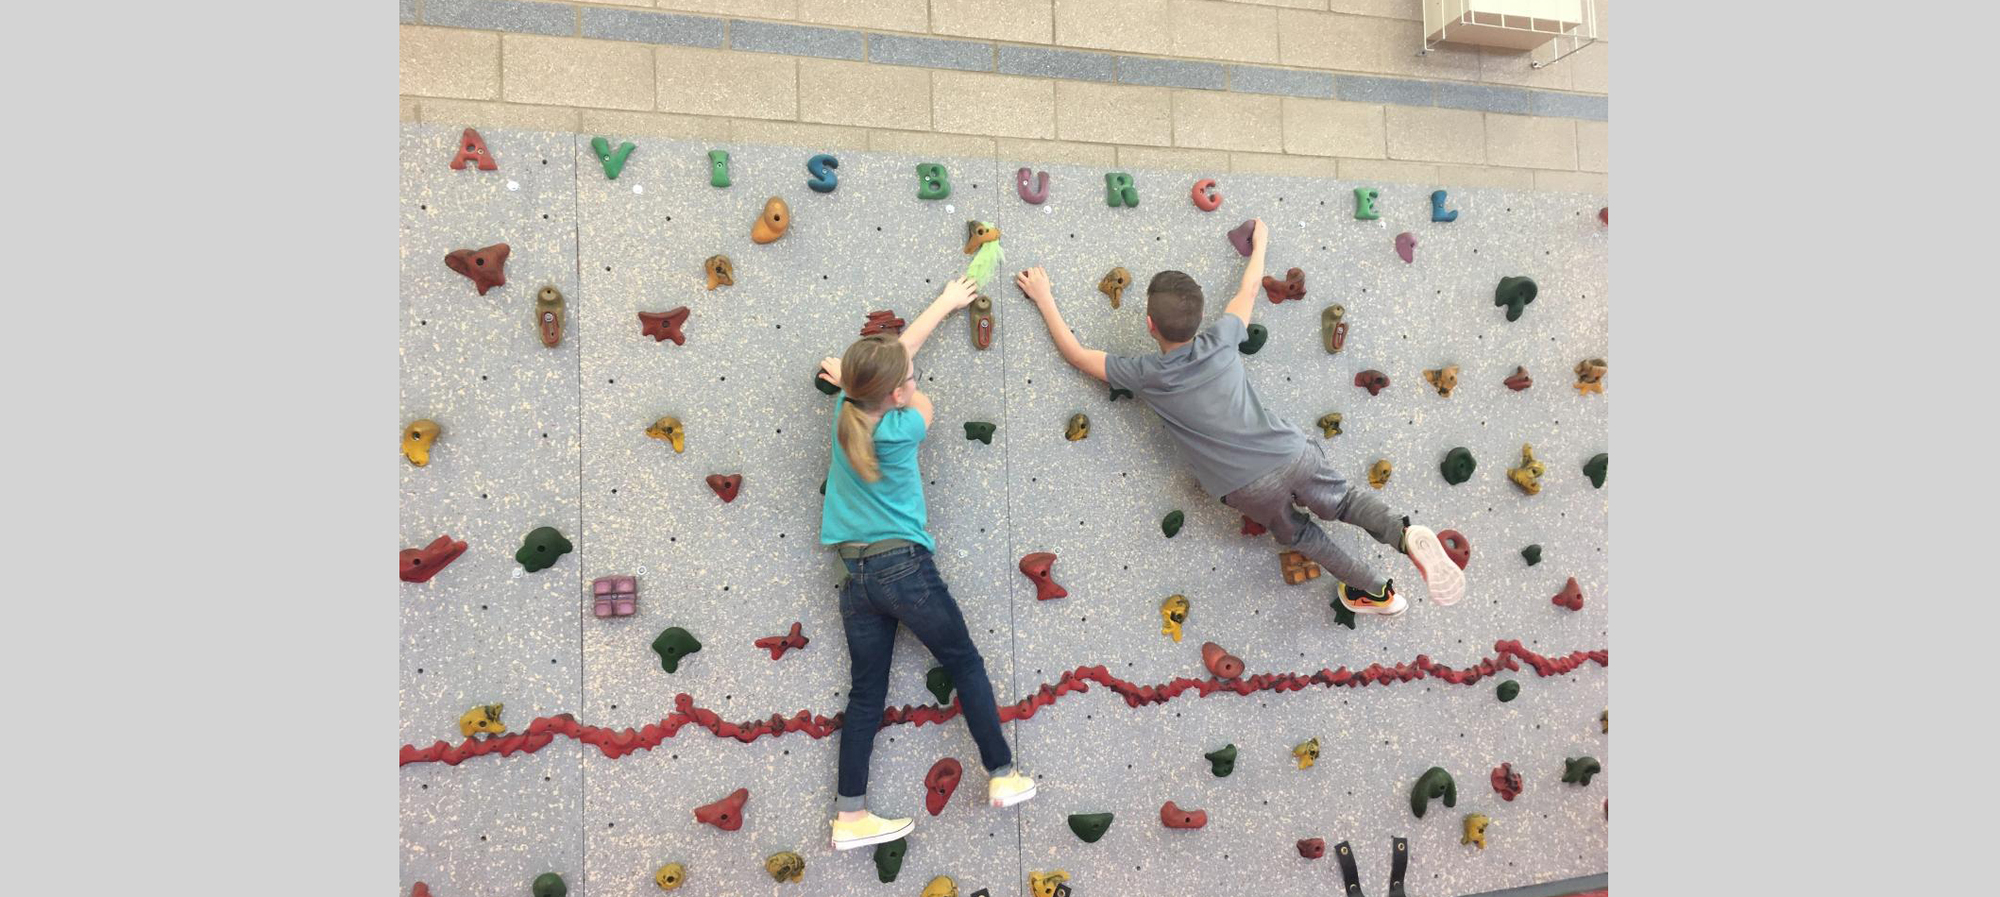 Two students climbing on the climbing wall in the gym.